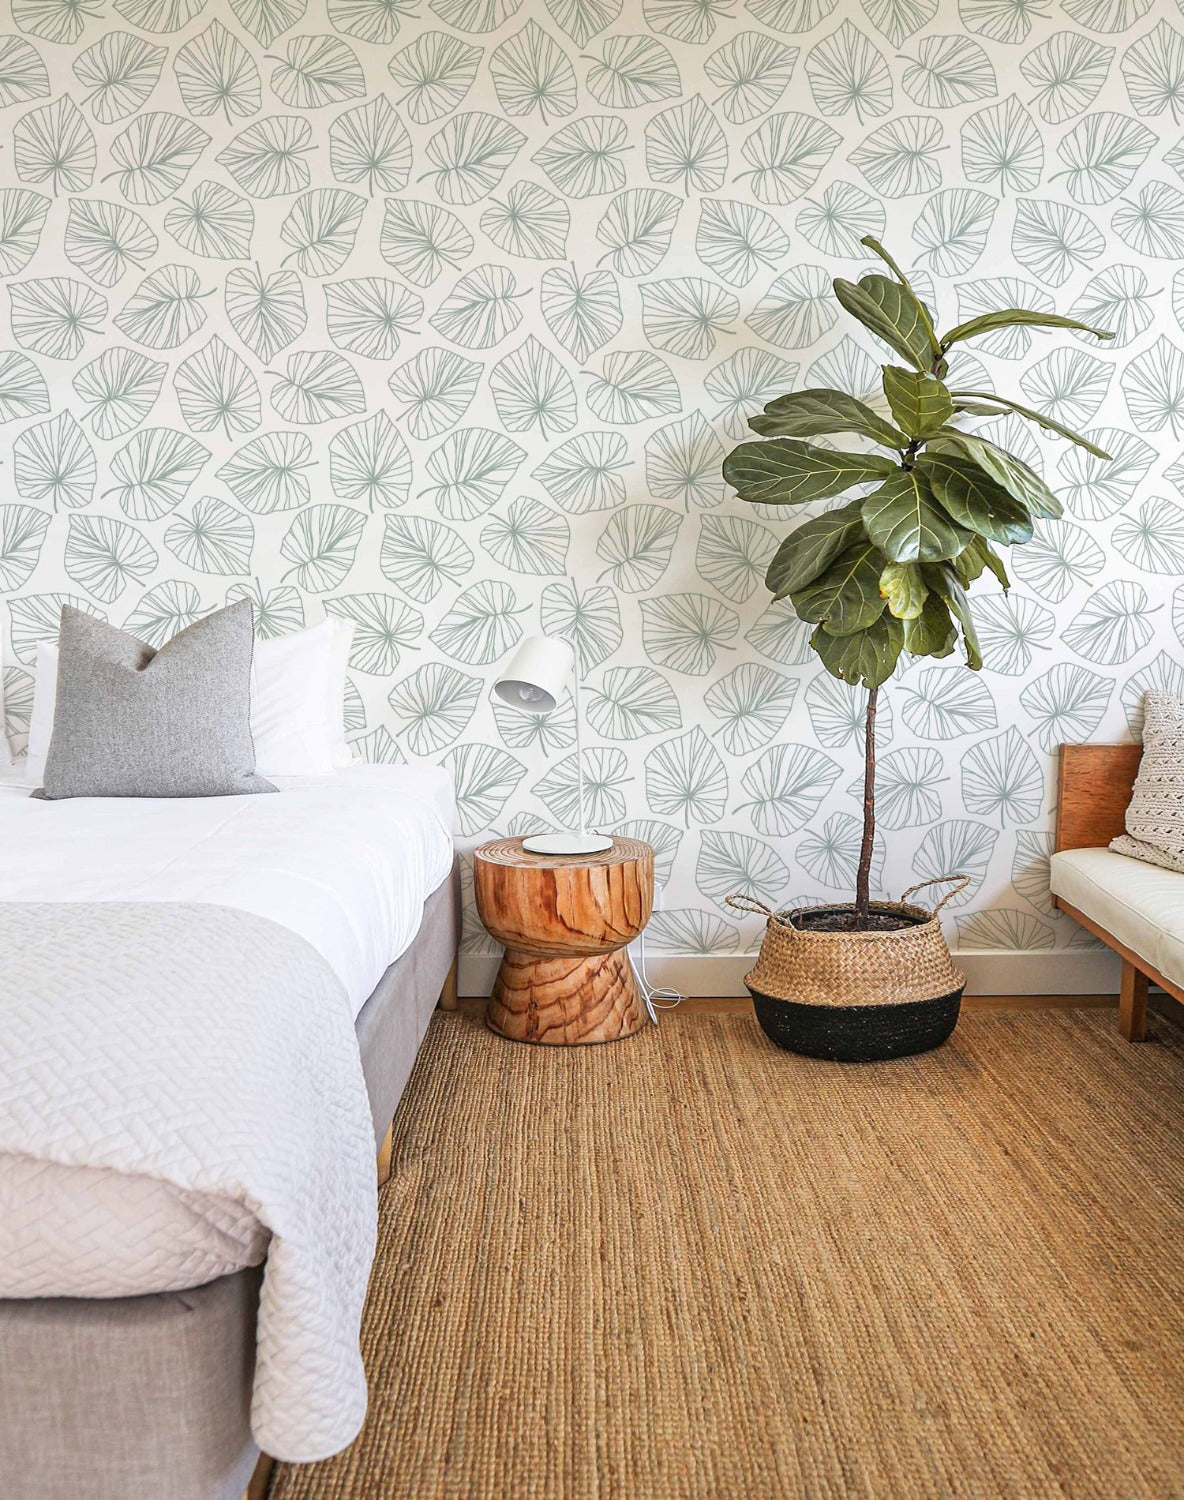 A cozy bedroom corner with the Line Art Tropical Leaf Wallpaper as a backdrop. The wallpaper features a simple line art design of large tropical leaves in sage green on a white background. The room includes a wooden side table, a white lamp, a bed with white and grey bedding, and a large potted plant, enhancing the natural and fresh atmosphere.